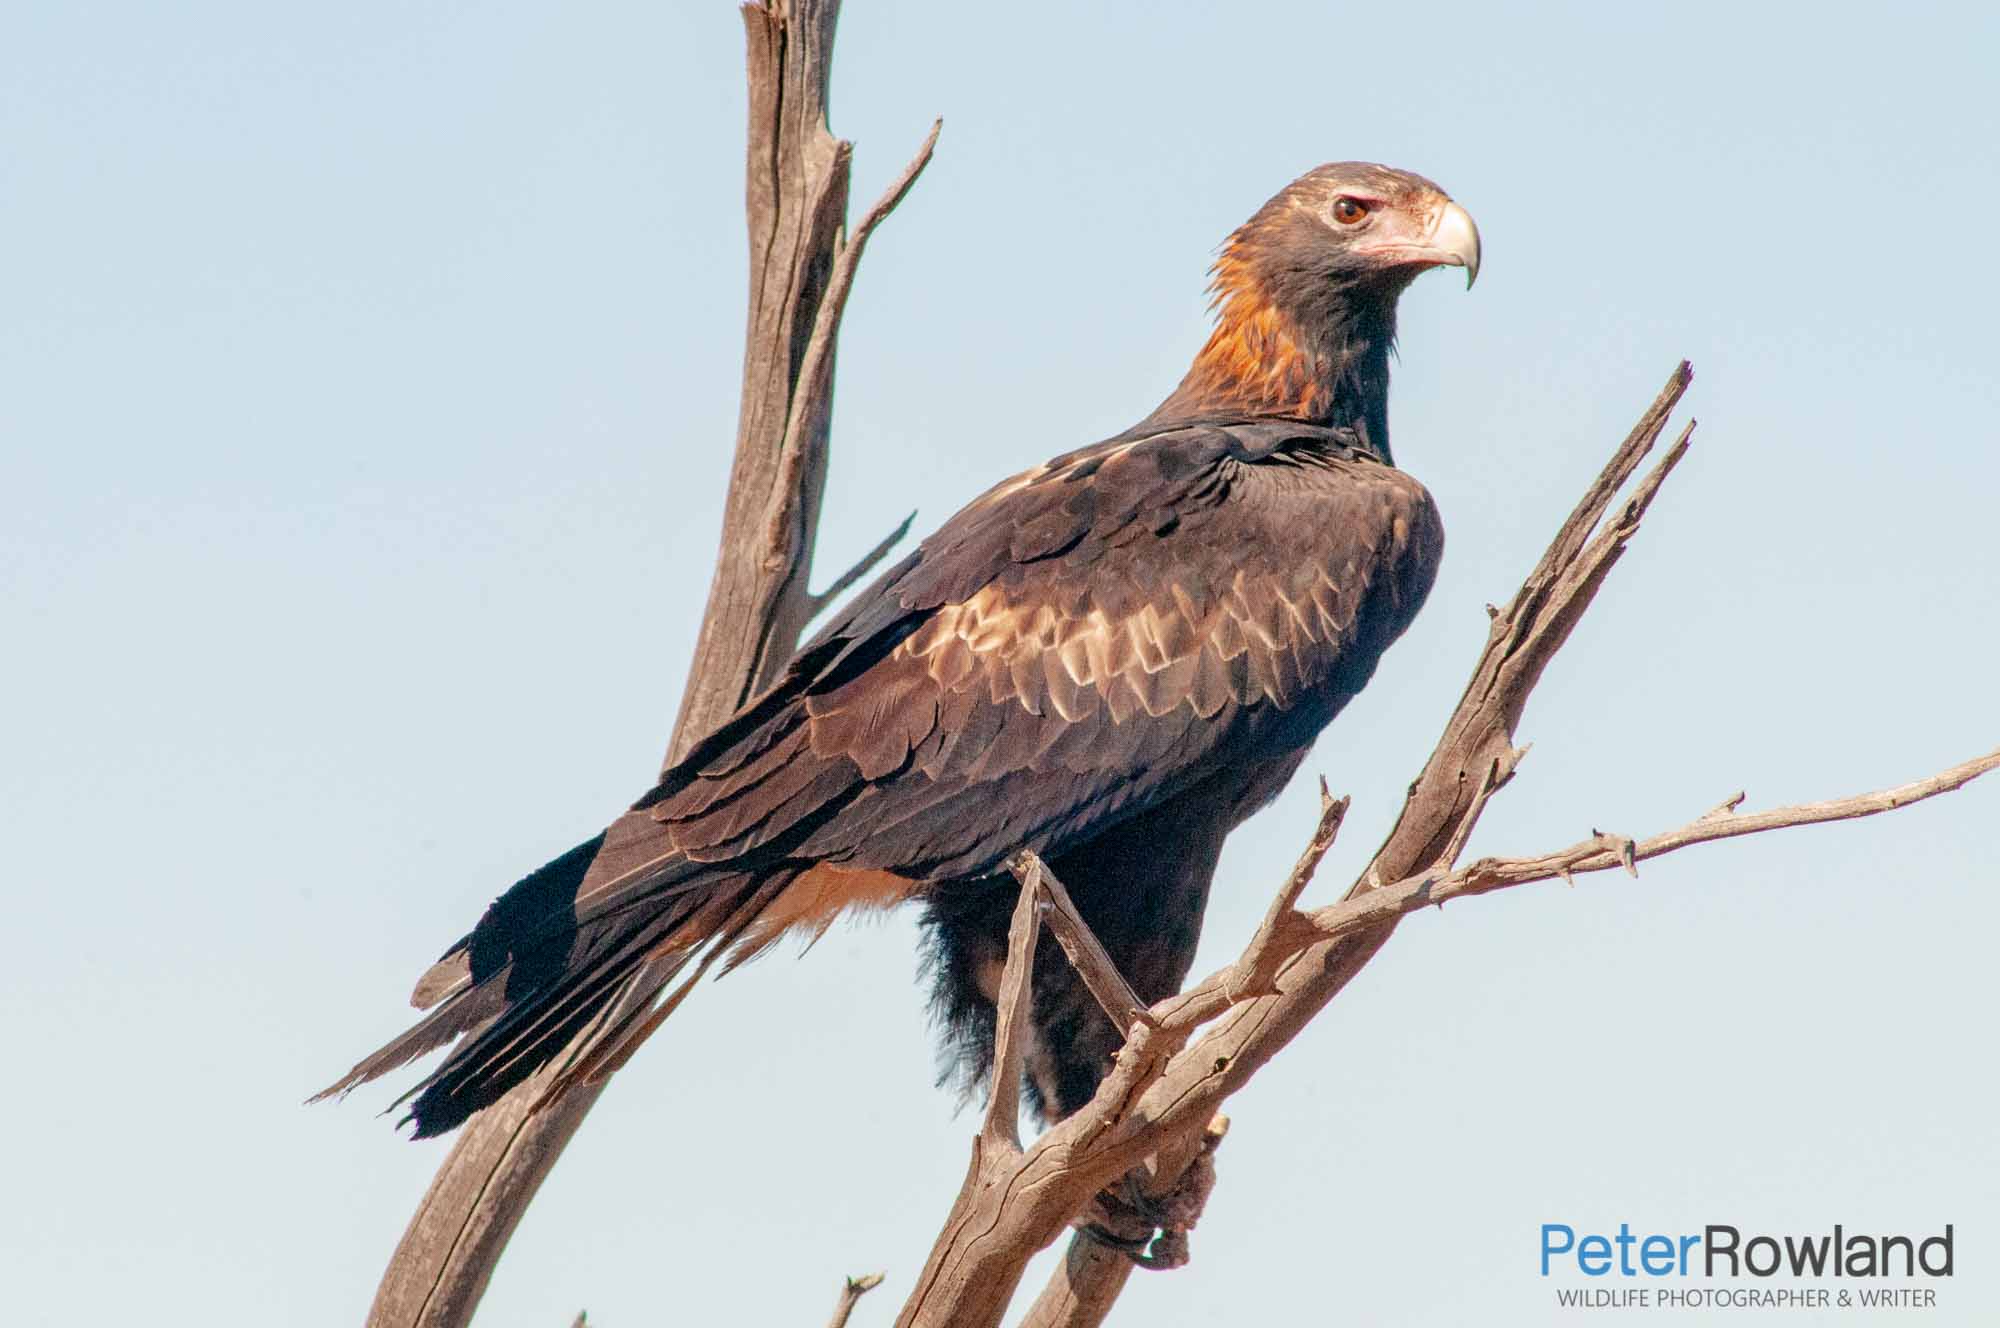 A Wedge-tailed Eagle perched at the top of a low dead tree in the outback of the Northern Territory